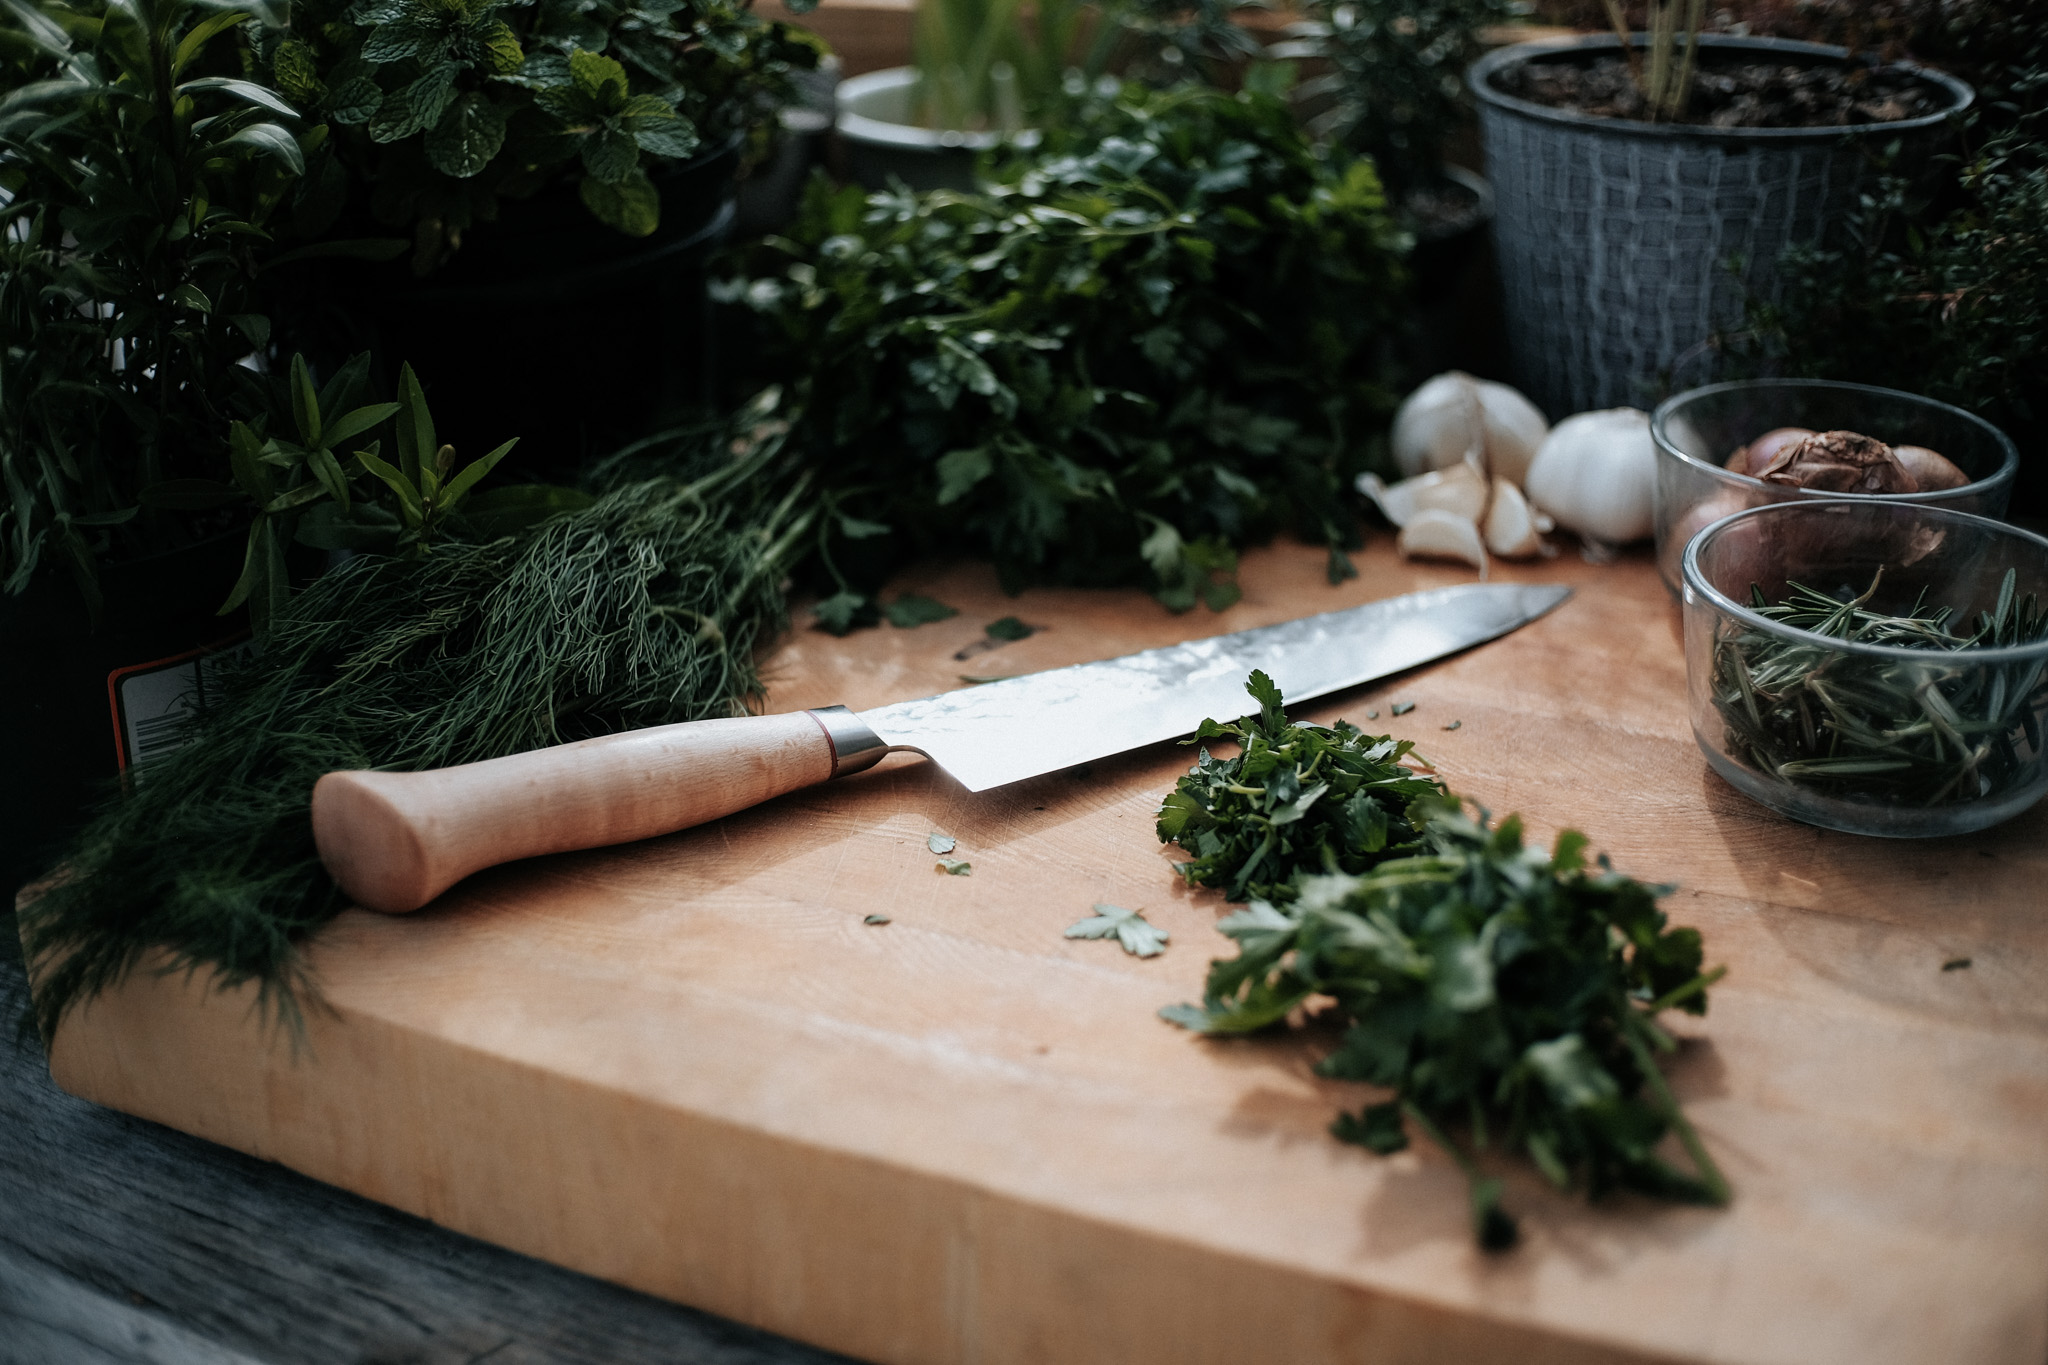 You Should Be Using Different Cutting Boards For Your Meats & Veggies